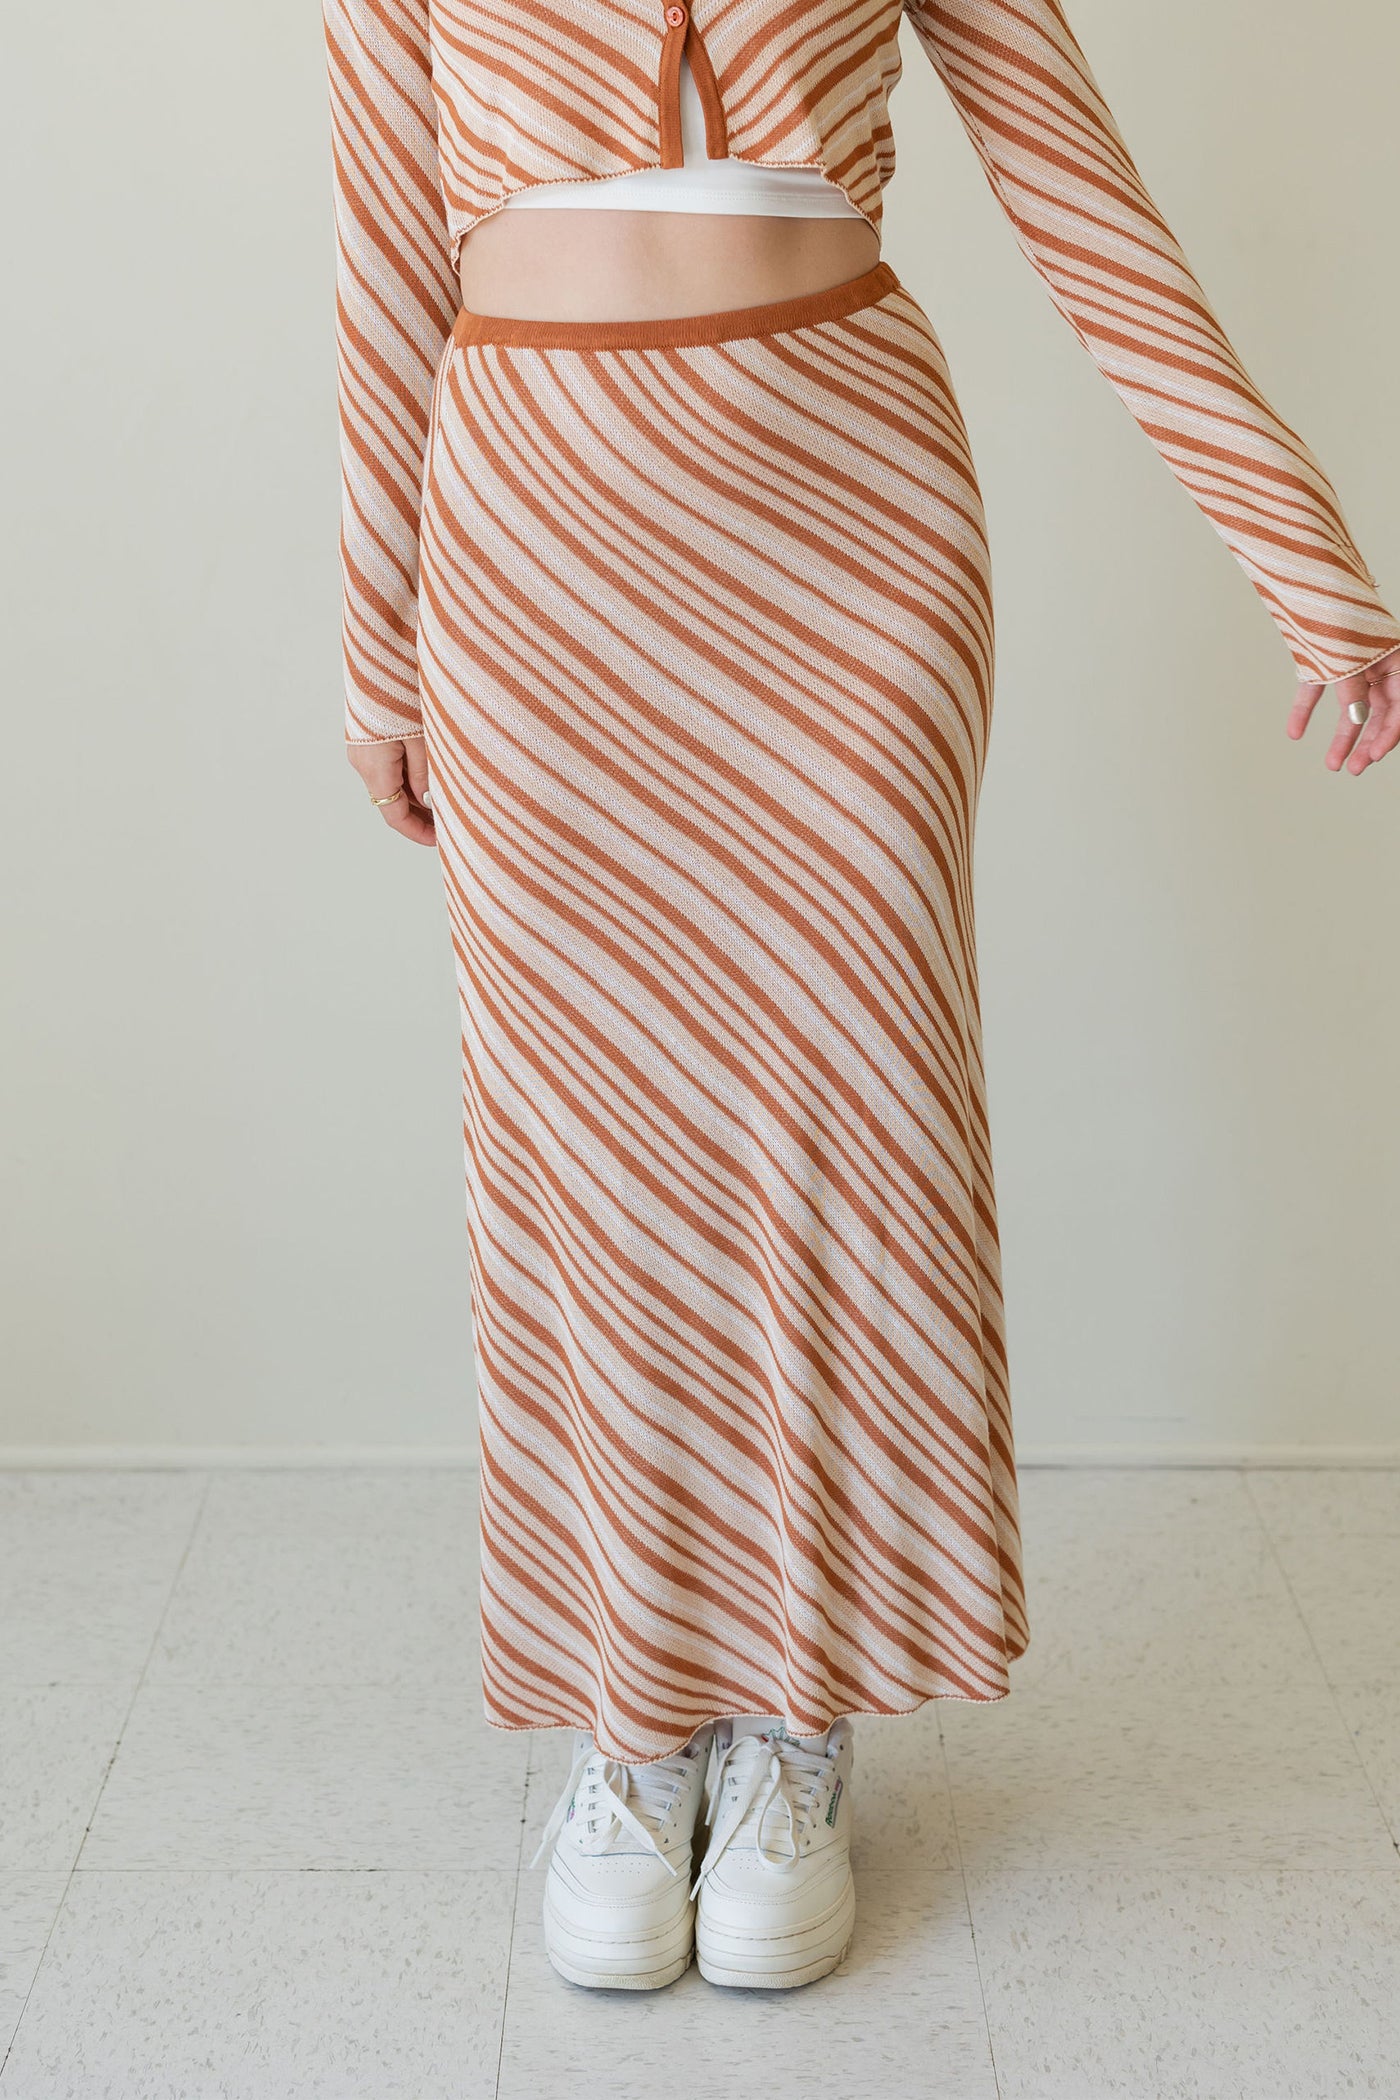 Another Place Striped Knit Maxi Skirt by For Good